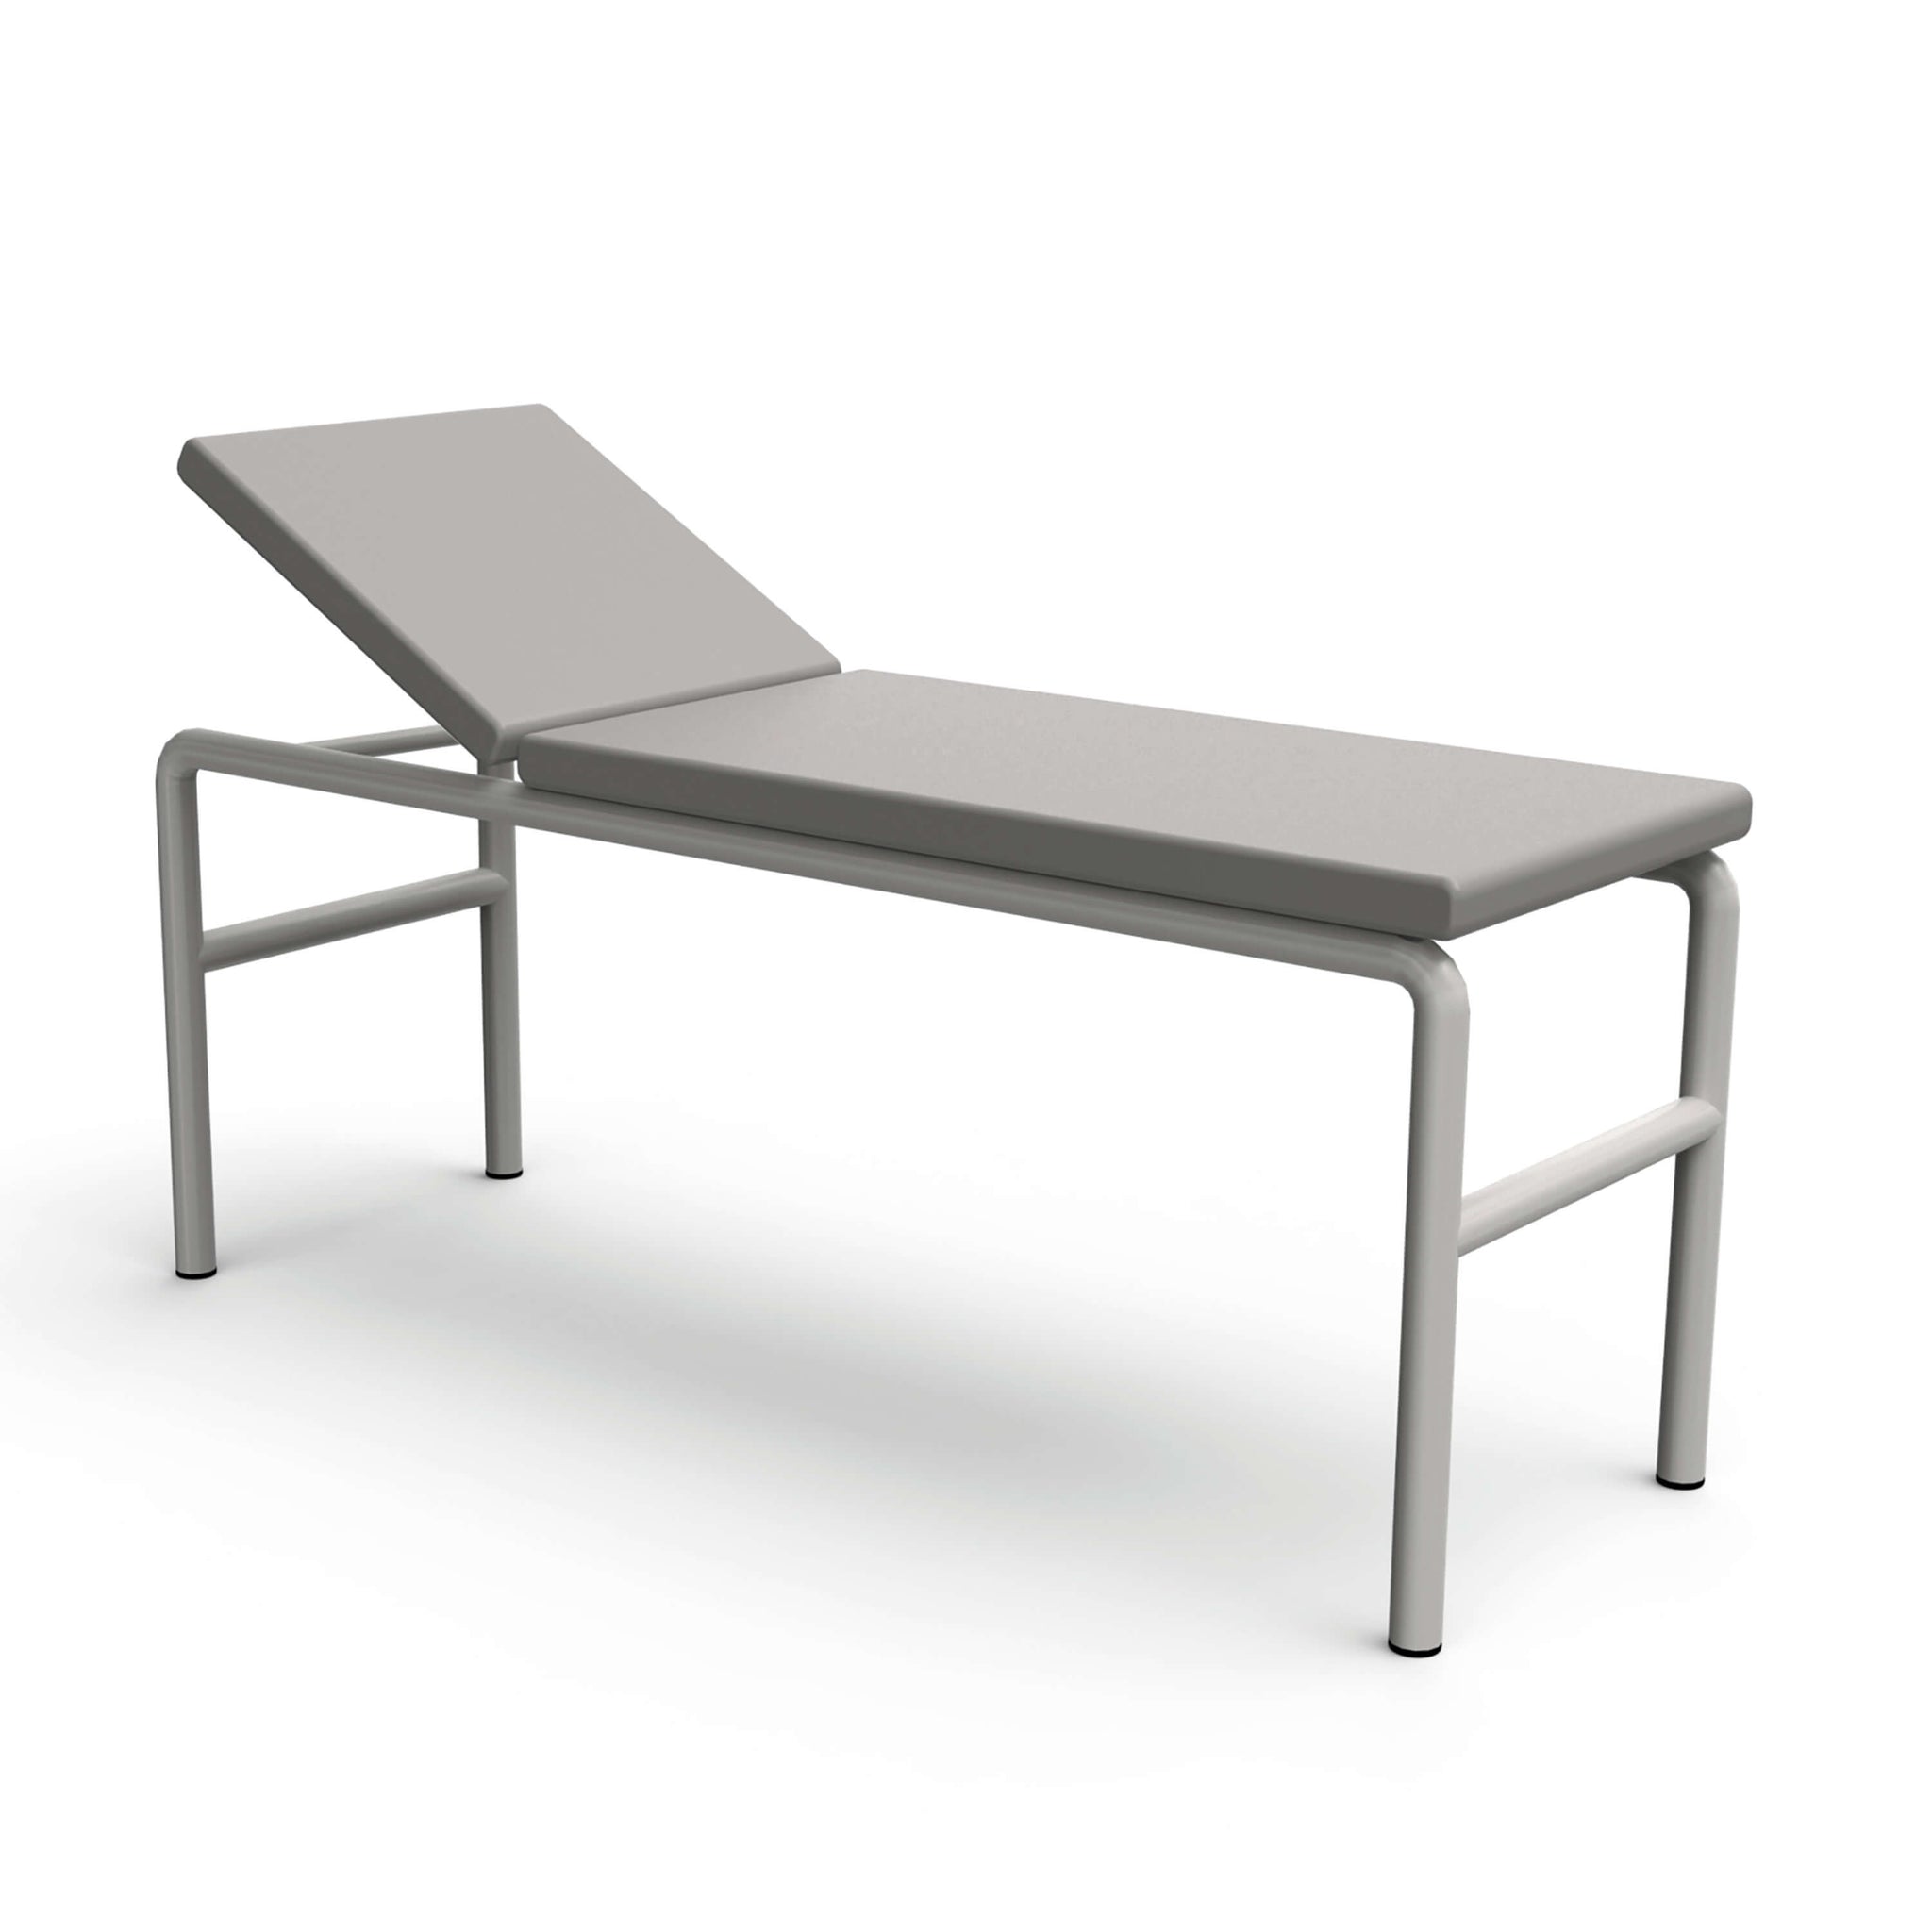 Fixed Height Examination Couch - Grey, 1800 x 600 x 820 mm